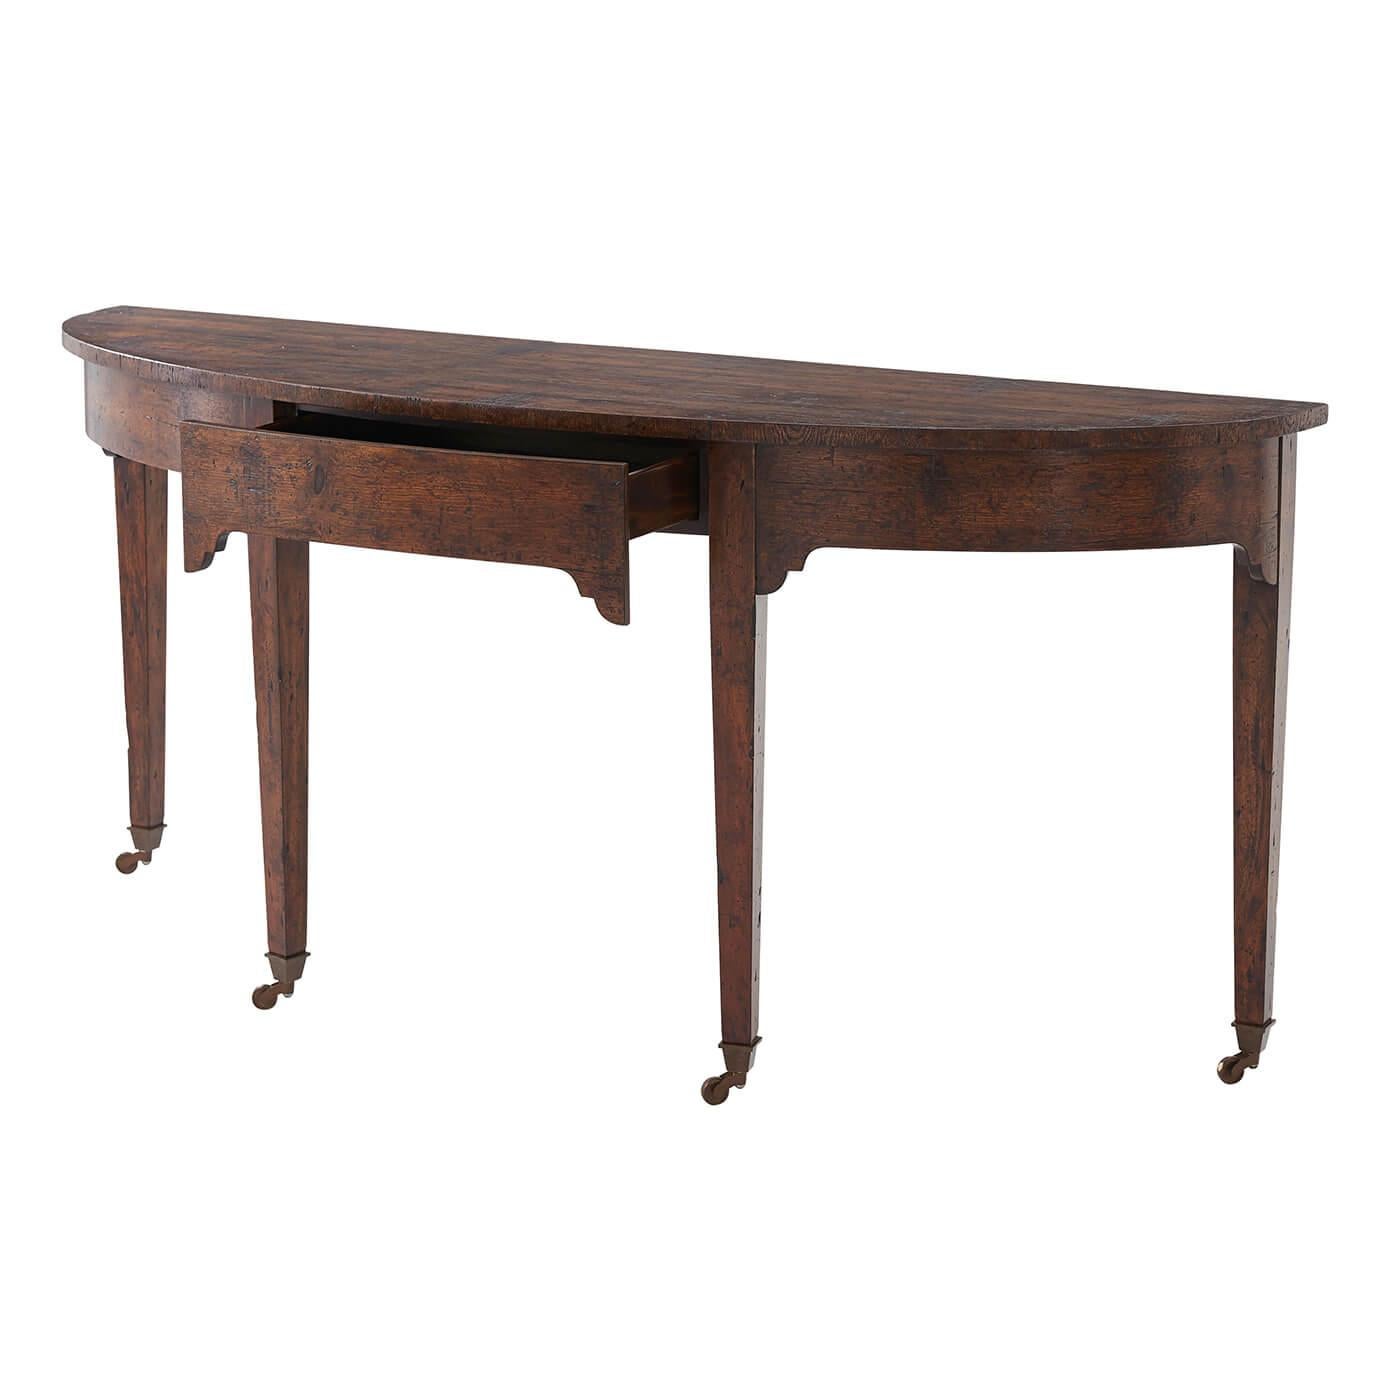 A Georgian style mahogany and reclaimed oak console table, the bowfront top above a plain frieze with drawer and corner brackets, on tapering legs terminating in brass castors.
Dimensions: 72.5